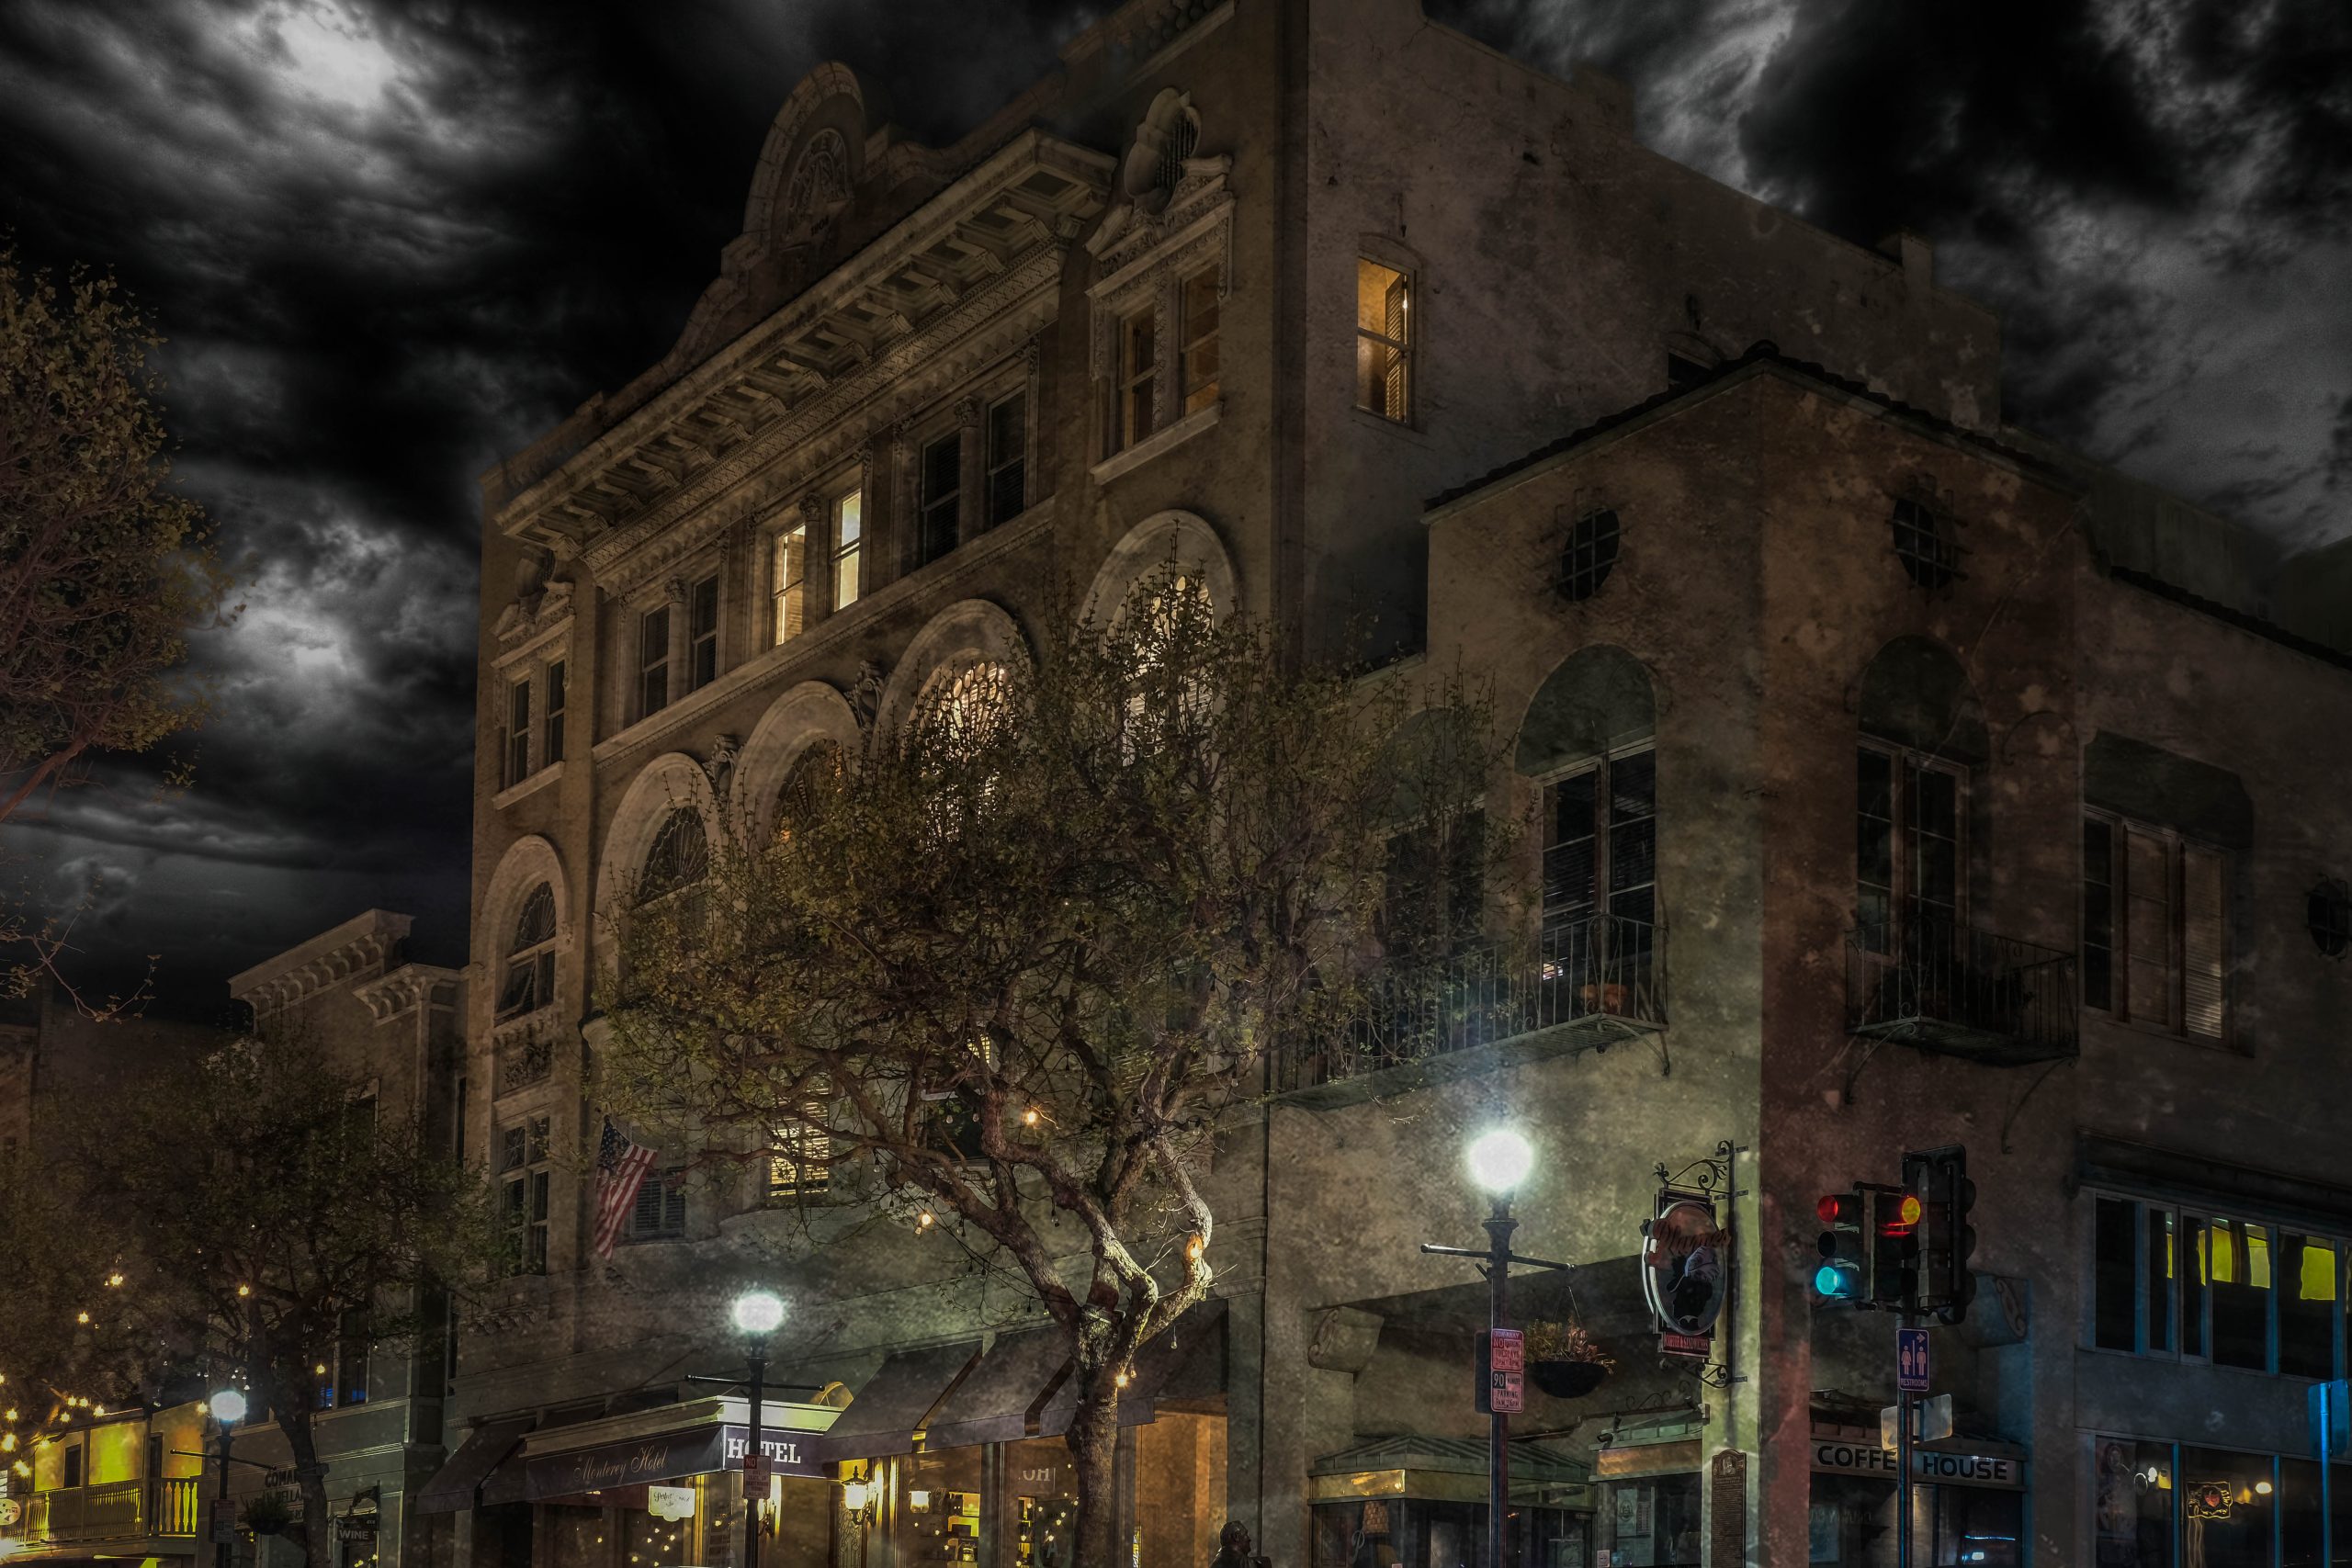 The Monterey Hotel stands defiant in the dark of night